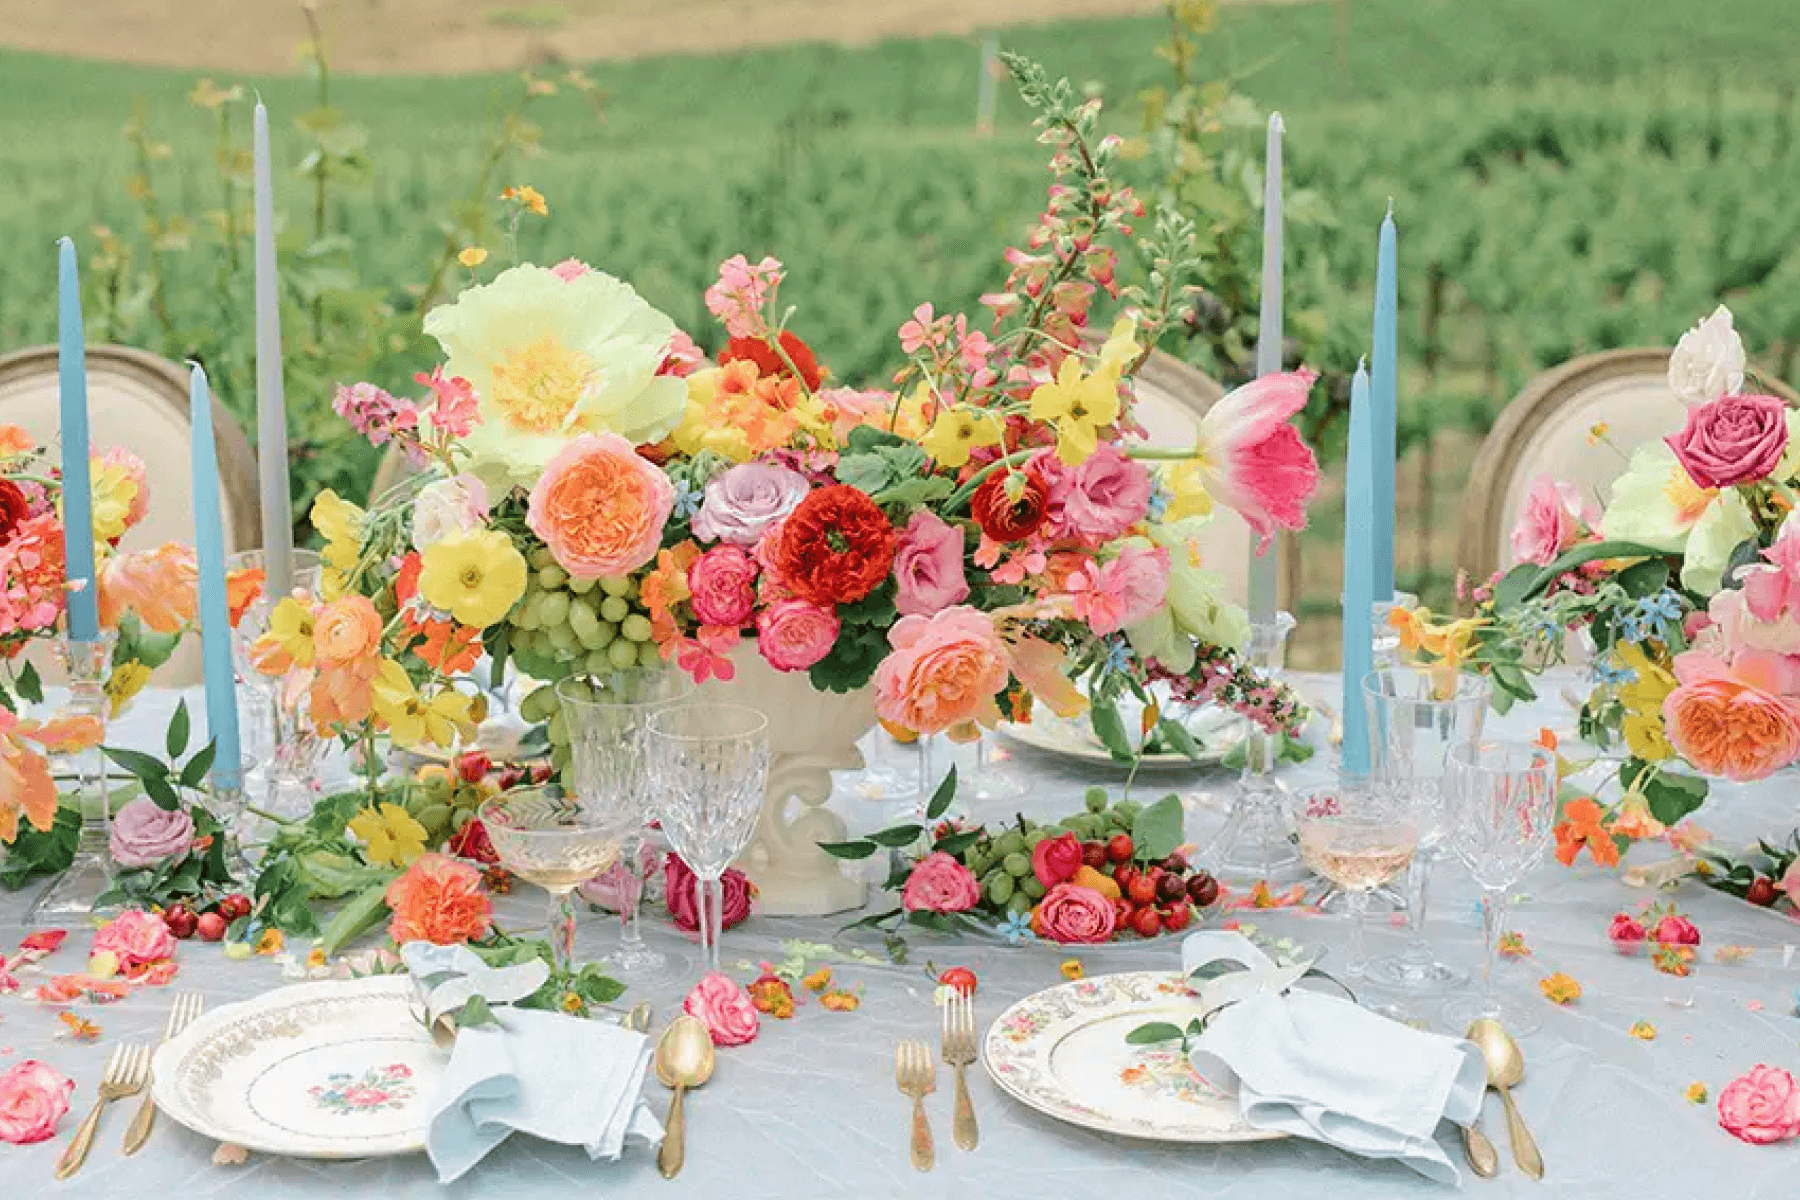 An outdoor table is set with colorful flowers spilling onto the place settings and light blue taper candles.